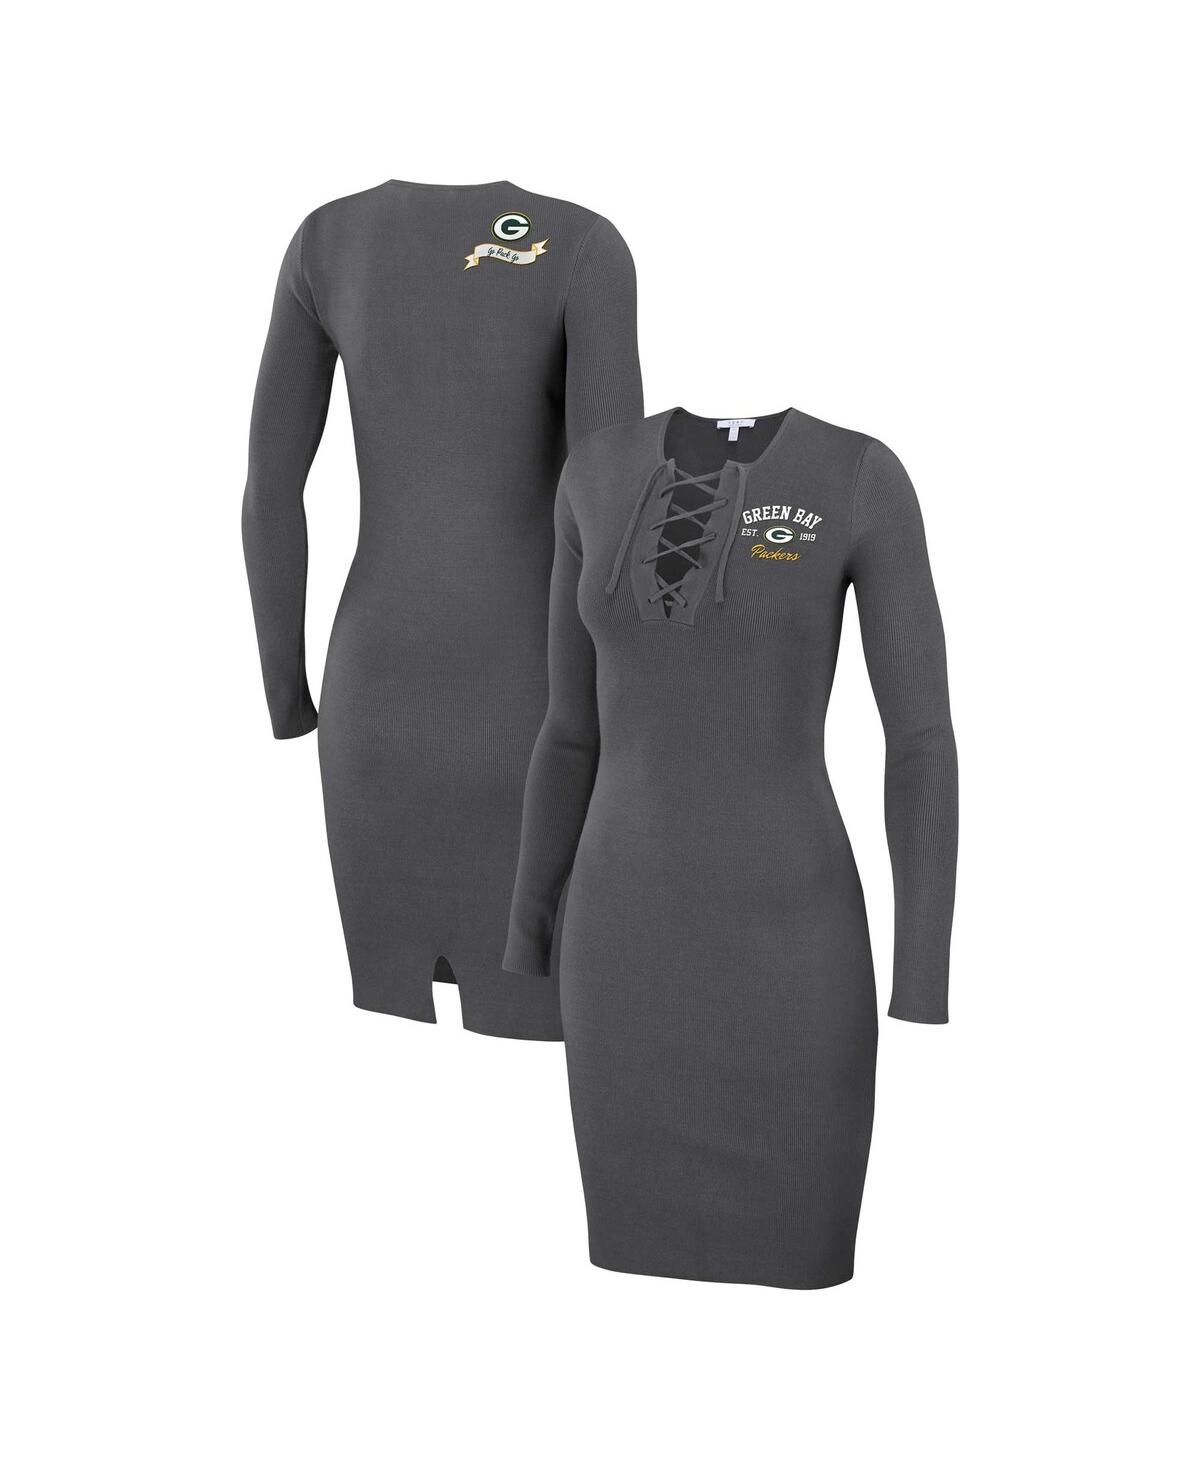 Women's Wear by Erin Andrews Charcoal Green Bay Packers Lace Up Long Sleeve Dress - Charcoal